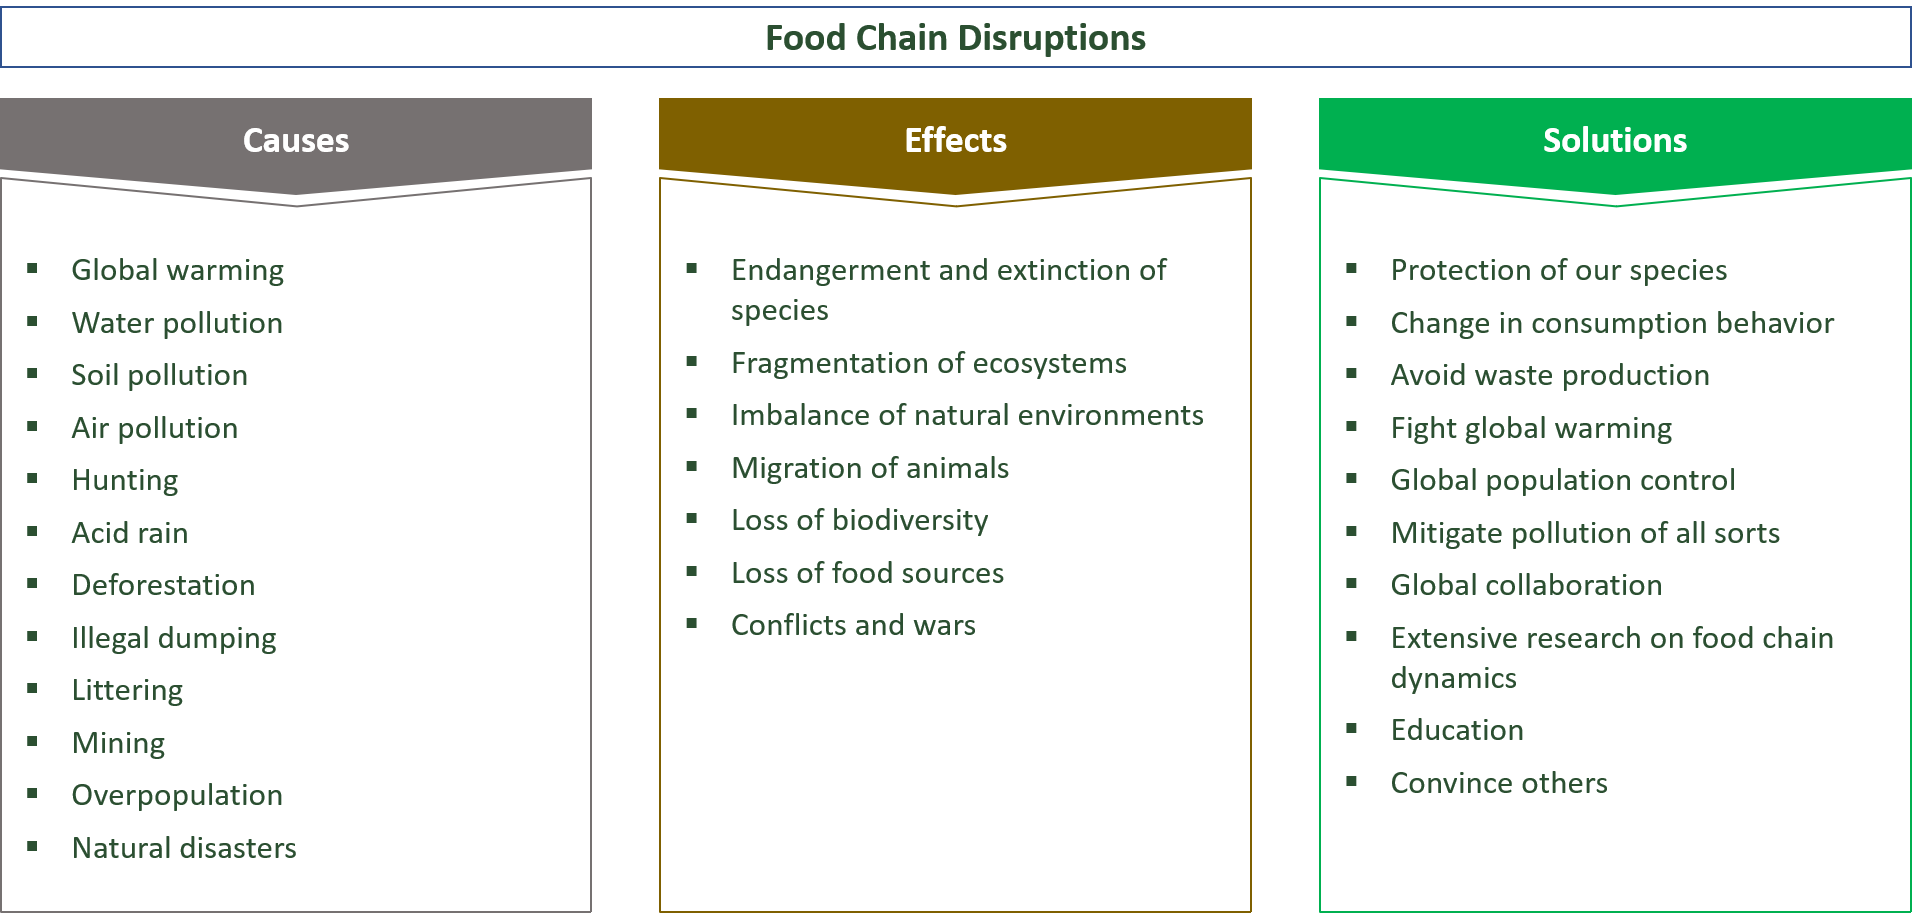 causes, effects, solutions regarding disruptions in the food chain